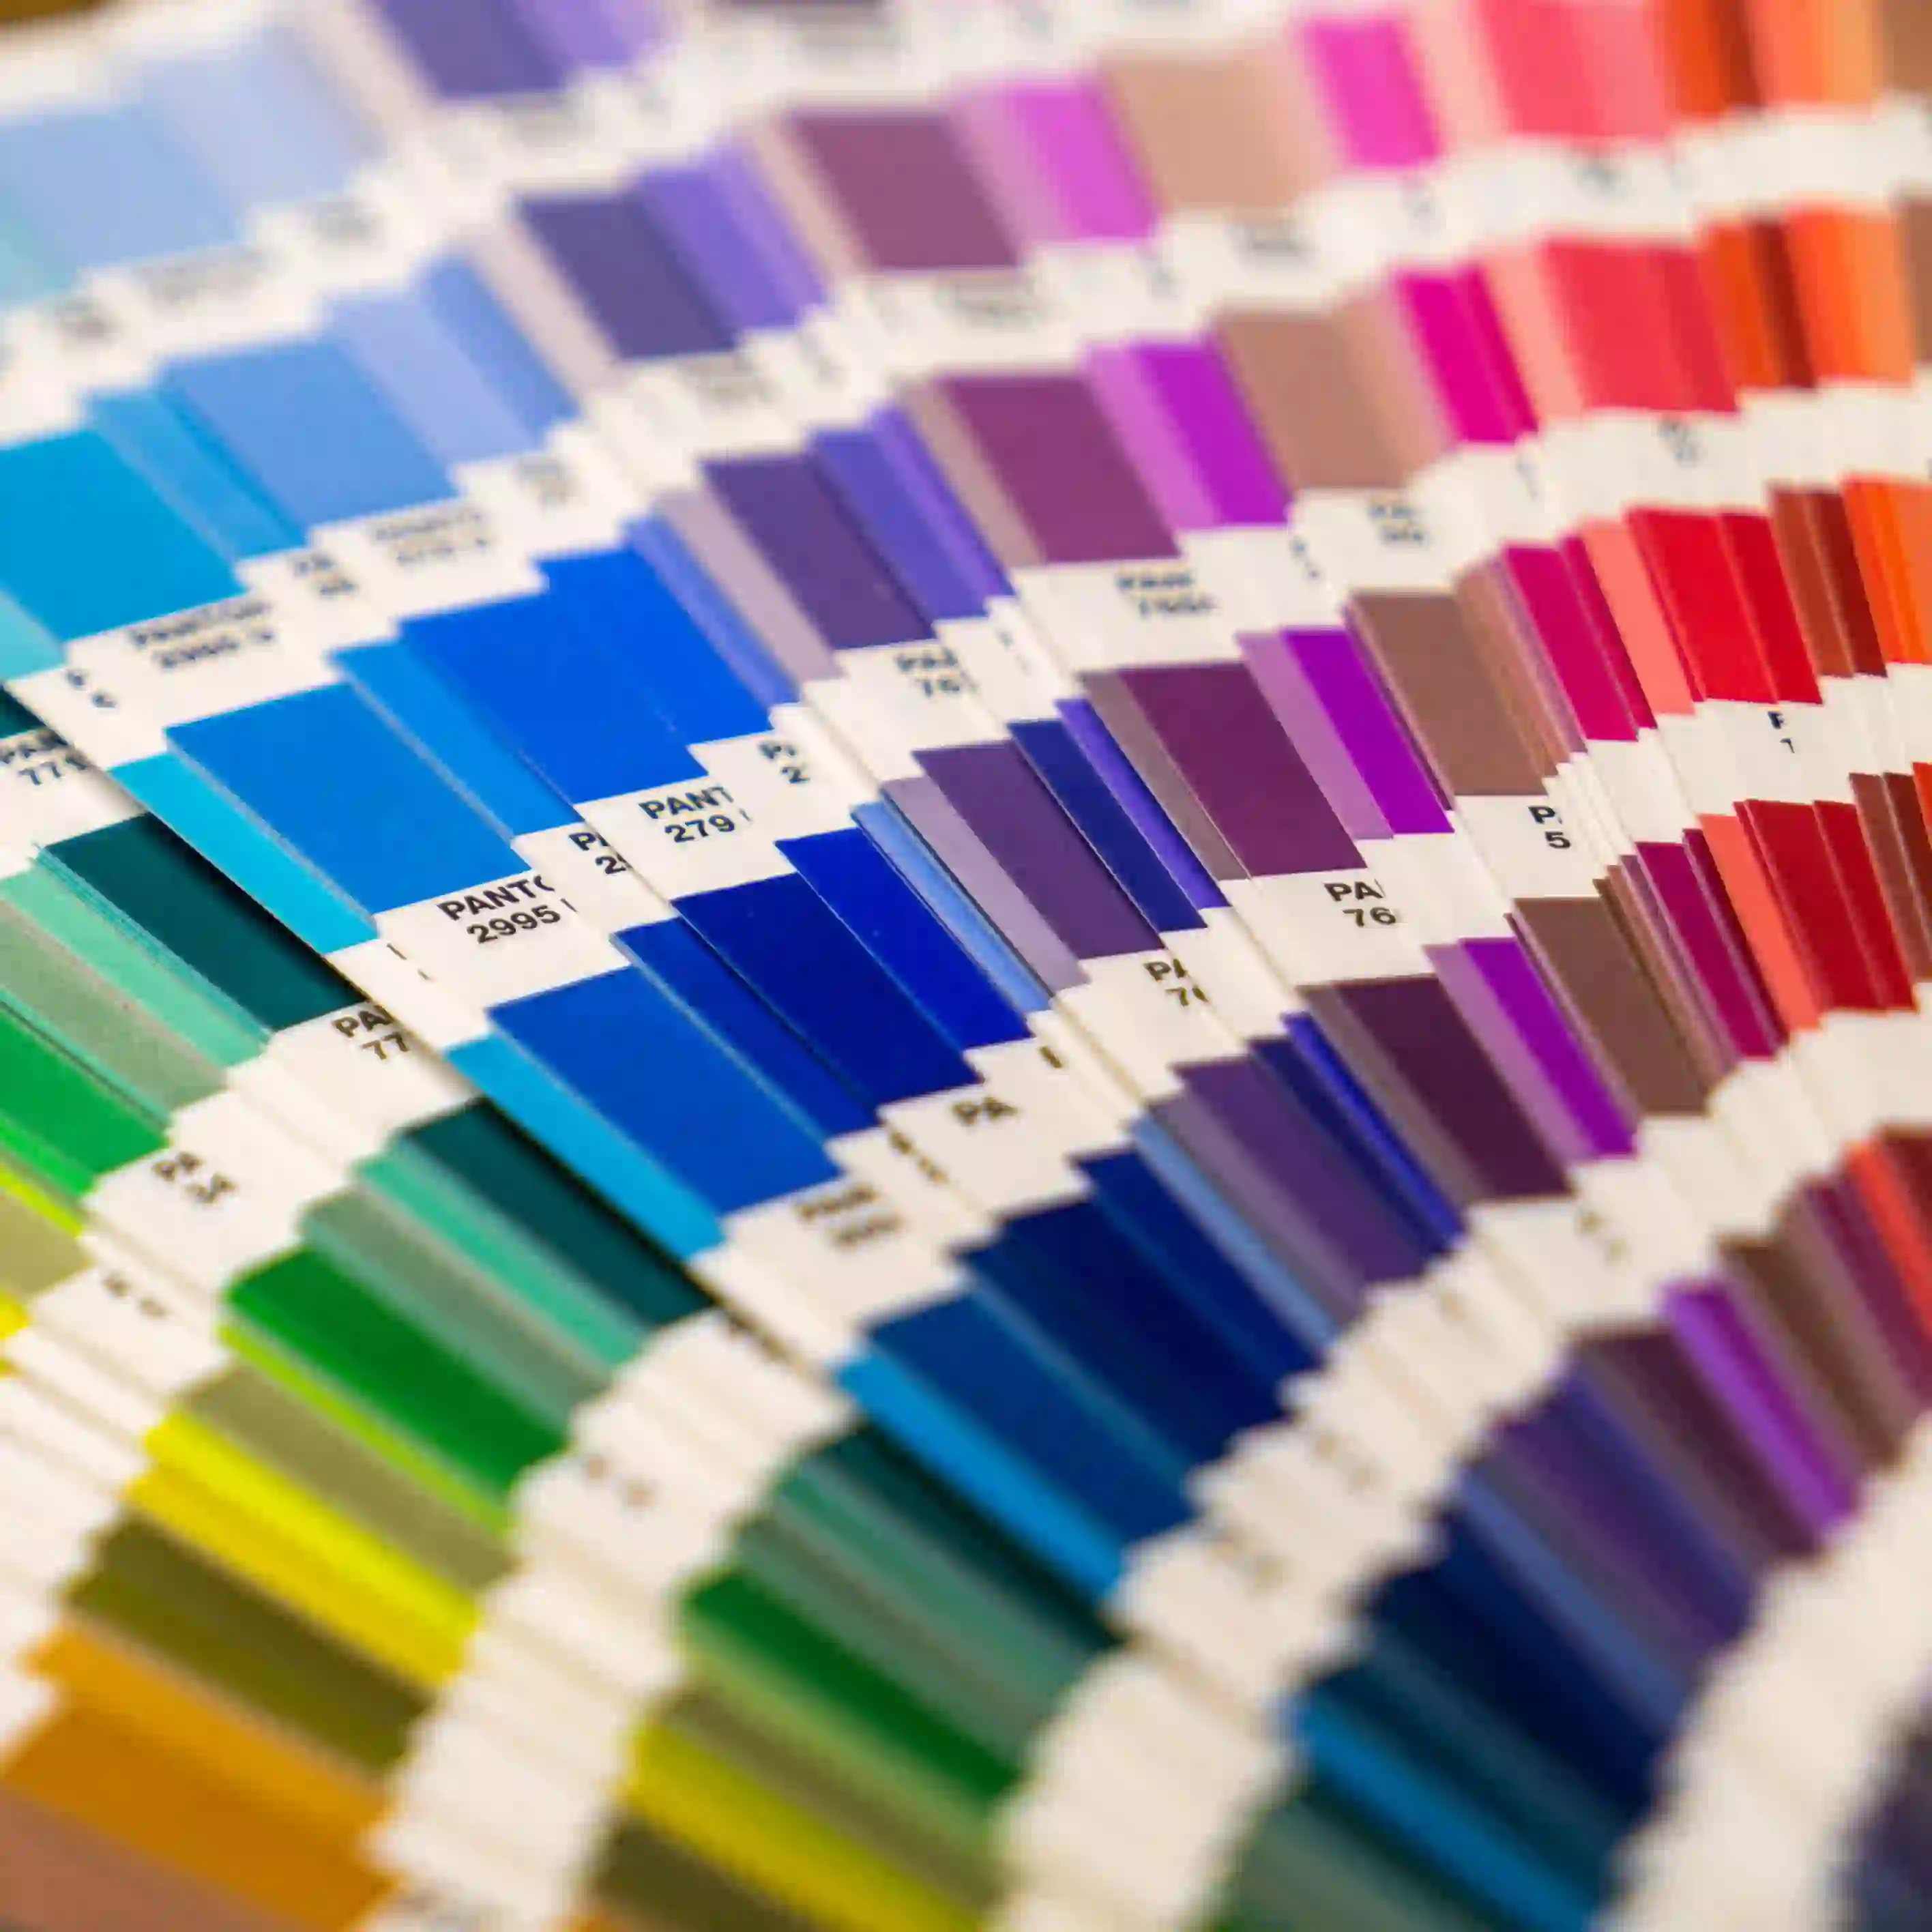 An image of a Pantone color swatch book.